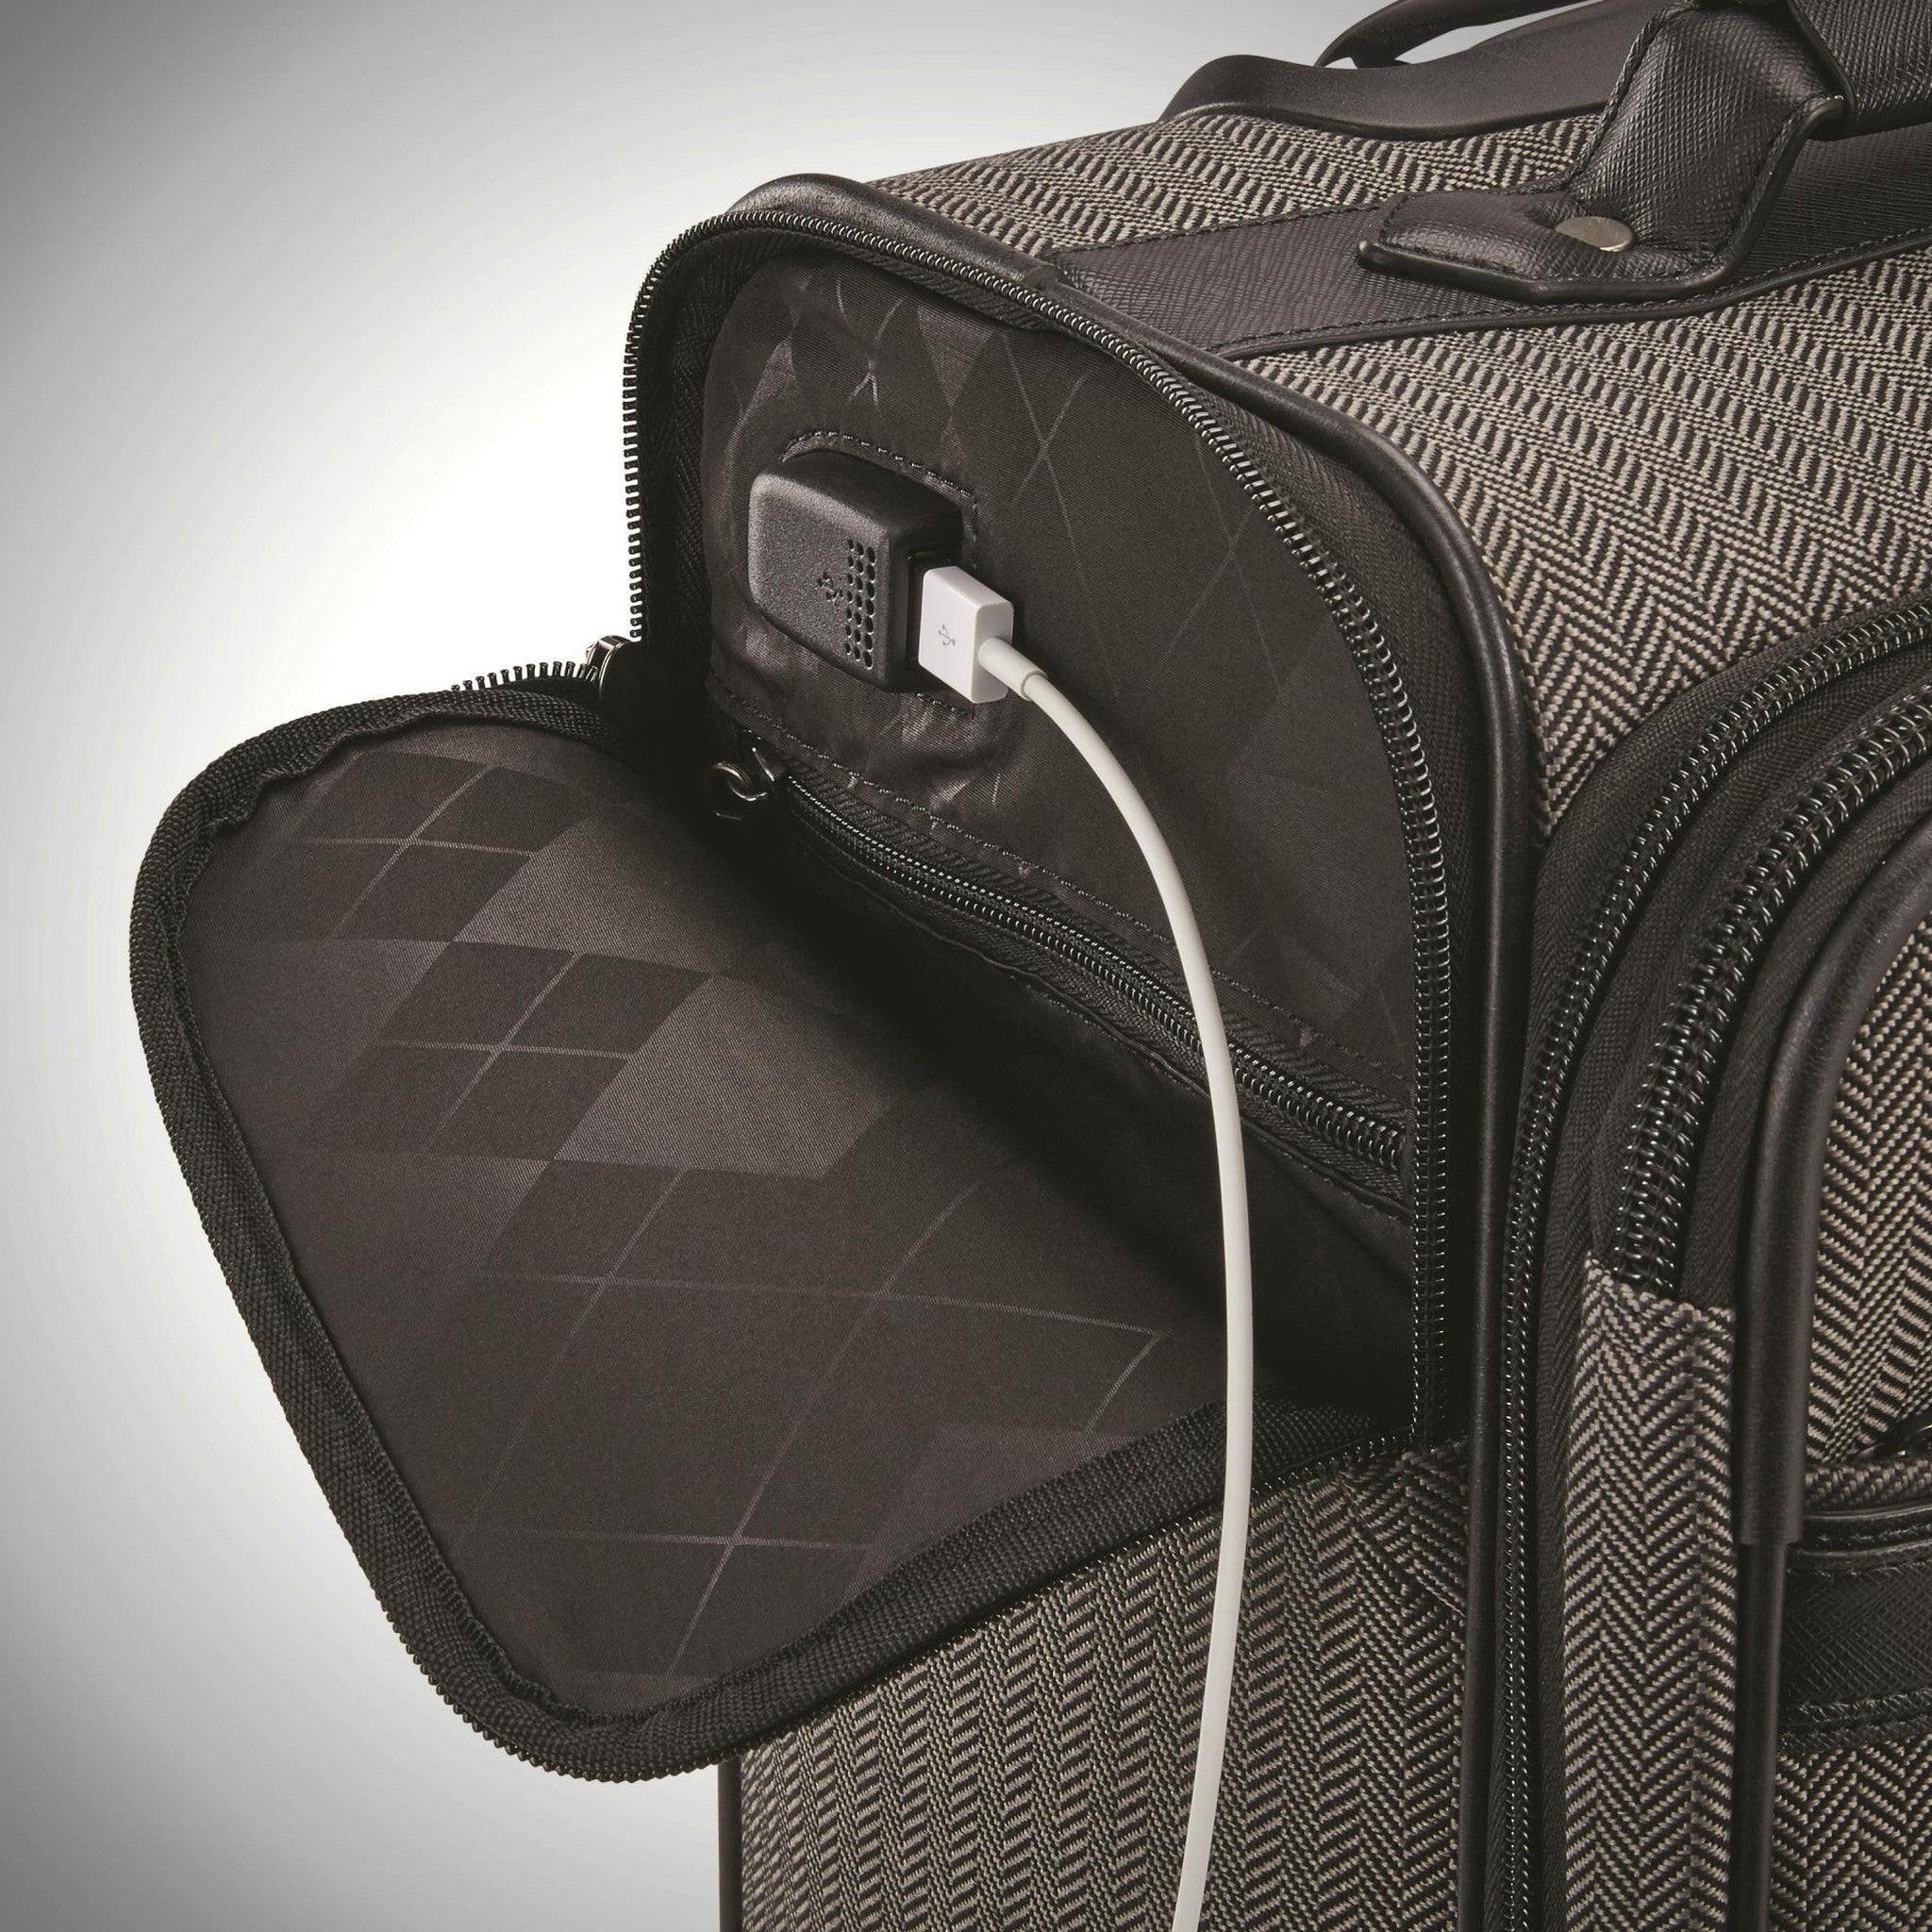 Underseat & expandable Cabin Bag